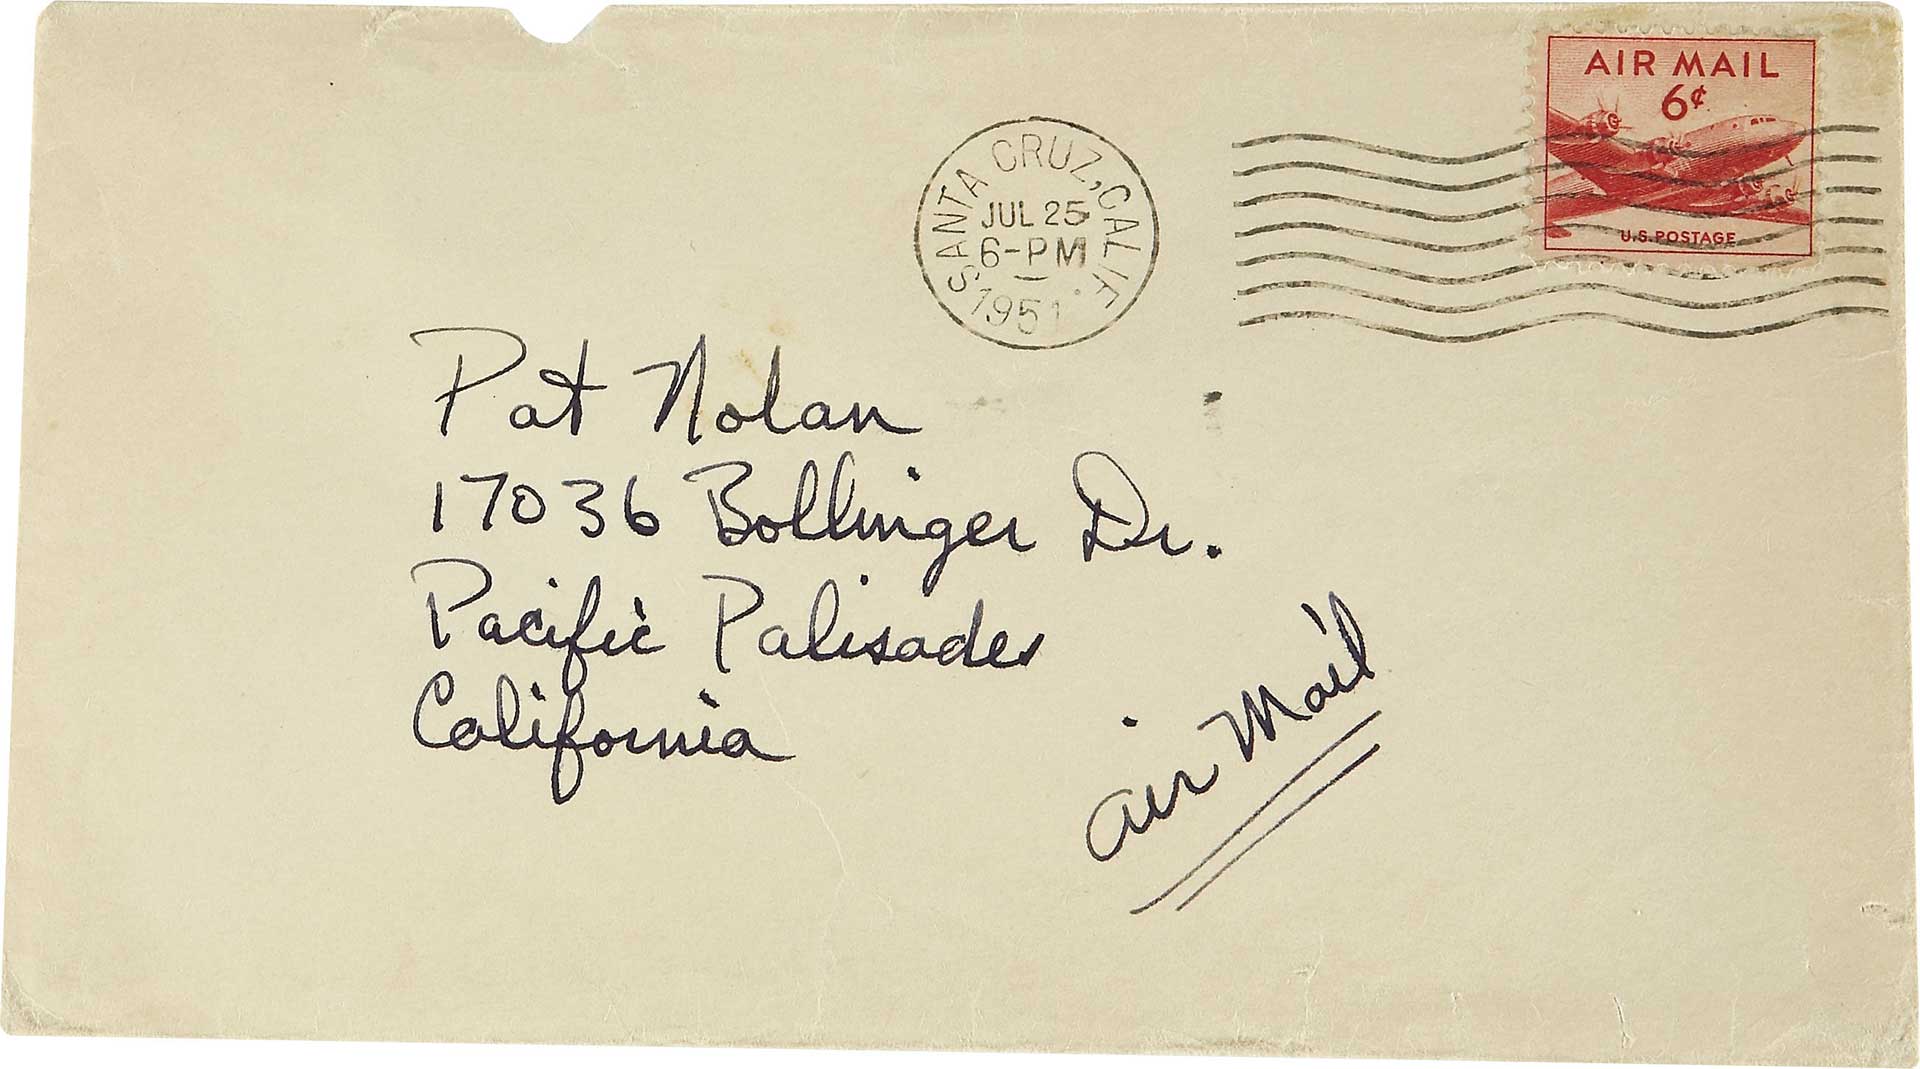 Bobby Driscoll’s Letter to Patricia Nolan – July 25, 1951